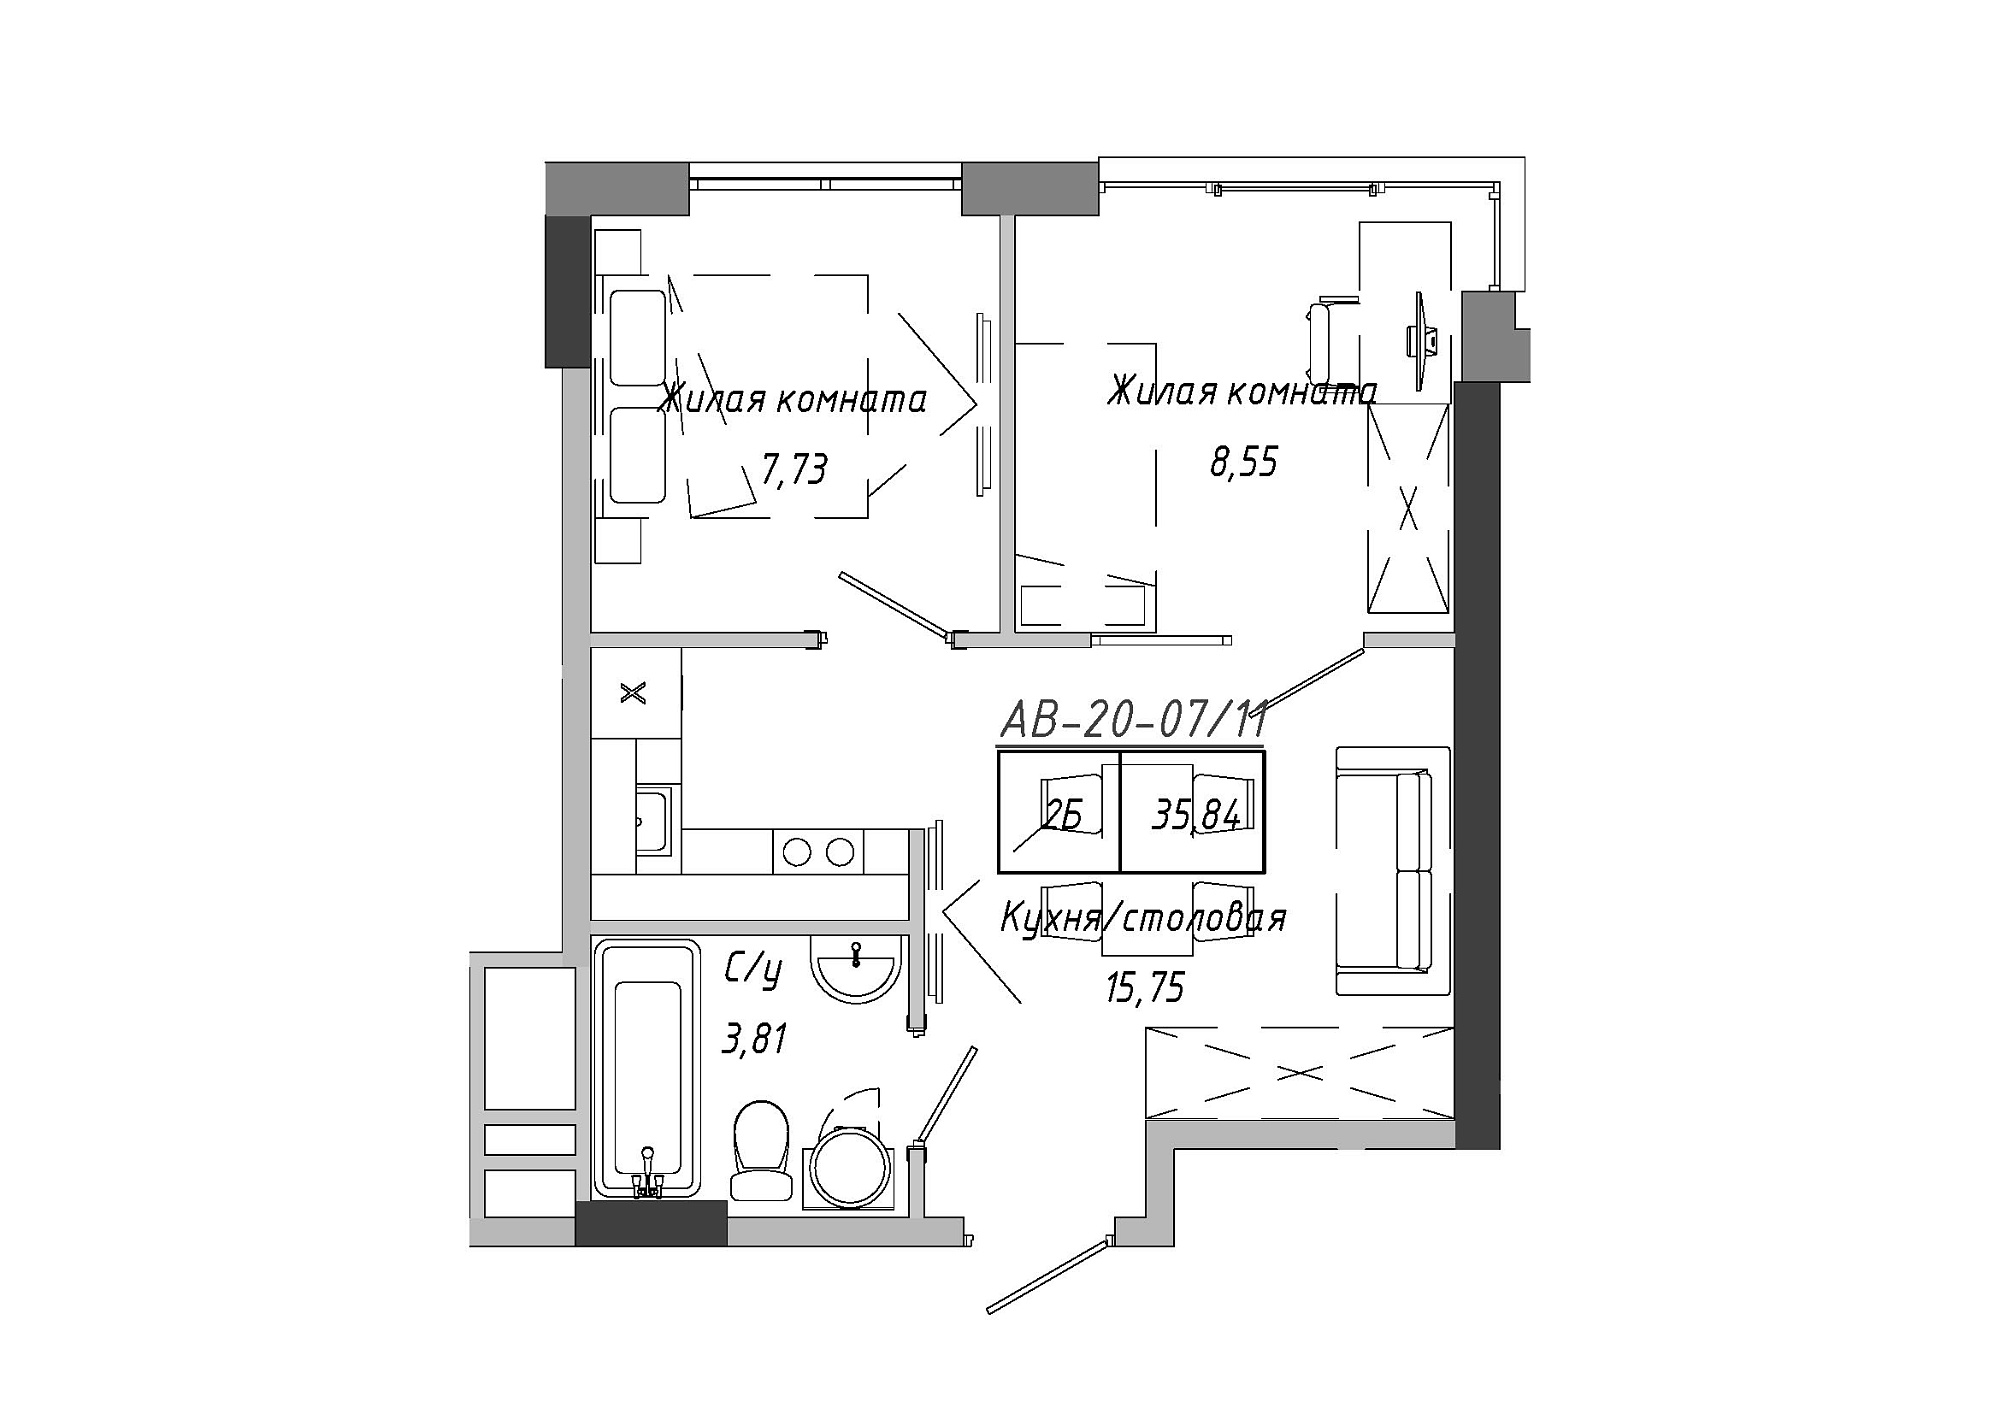 Planning 2-rm flats area 36.12m2, AB-20-07/00011.